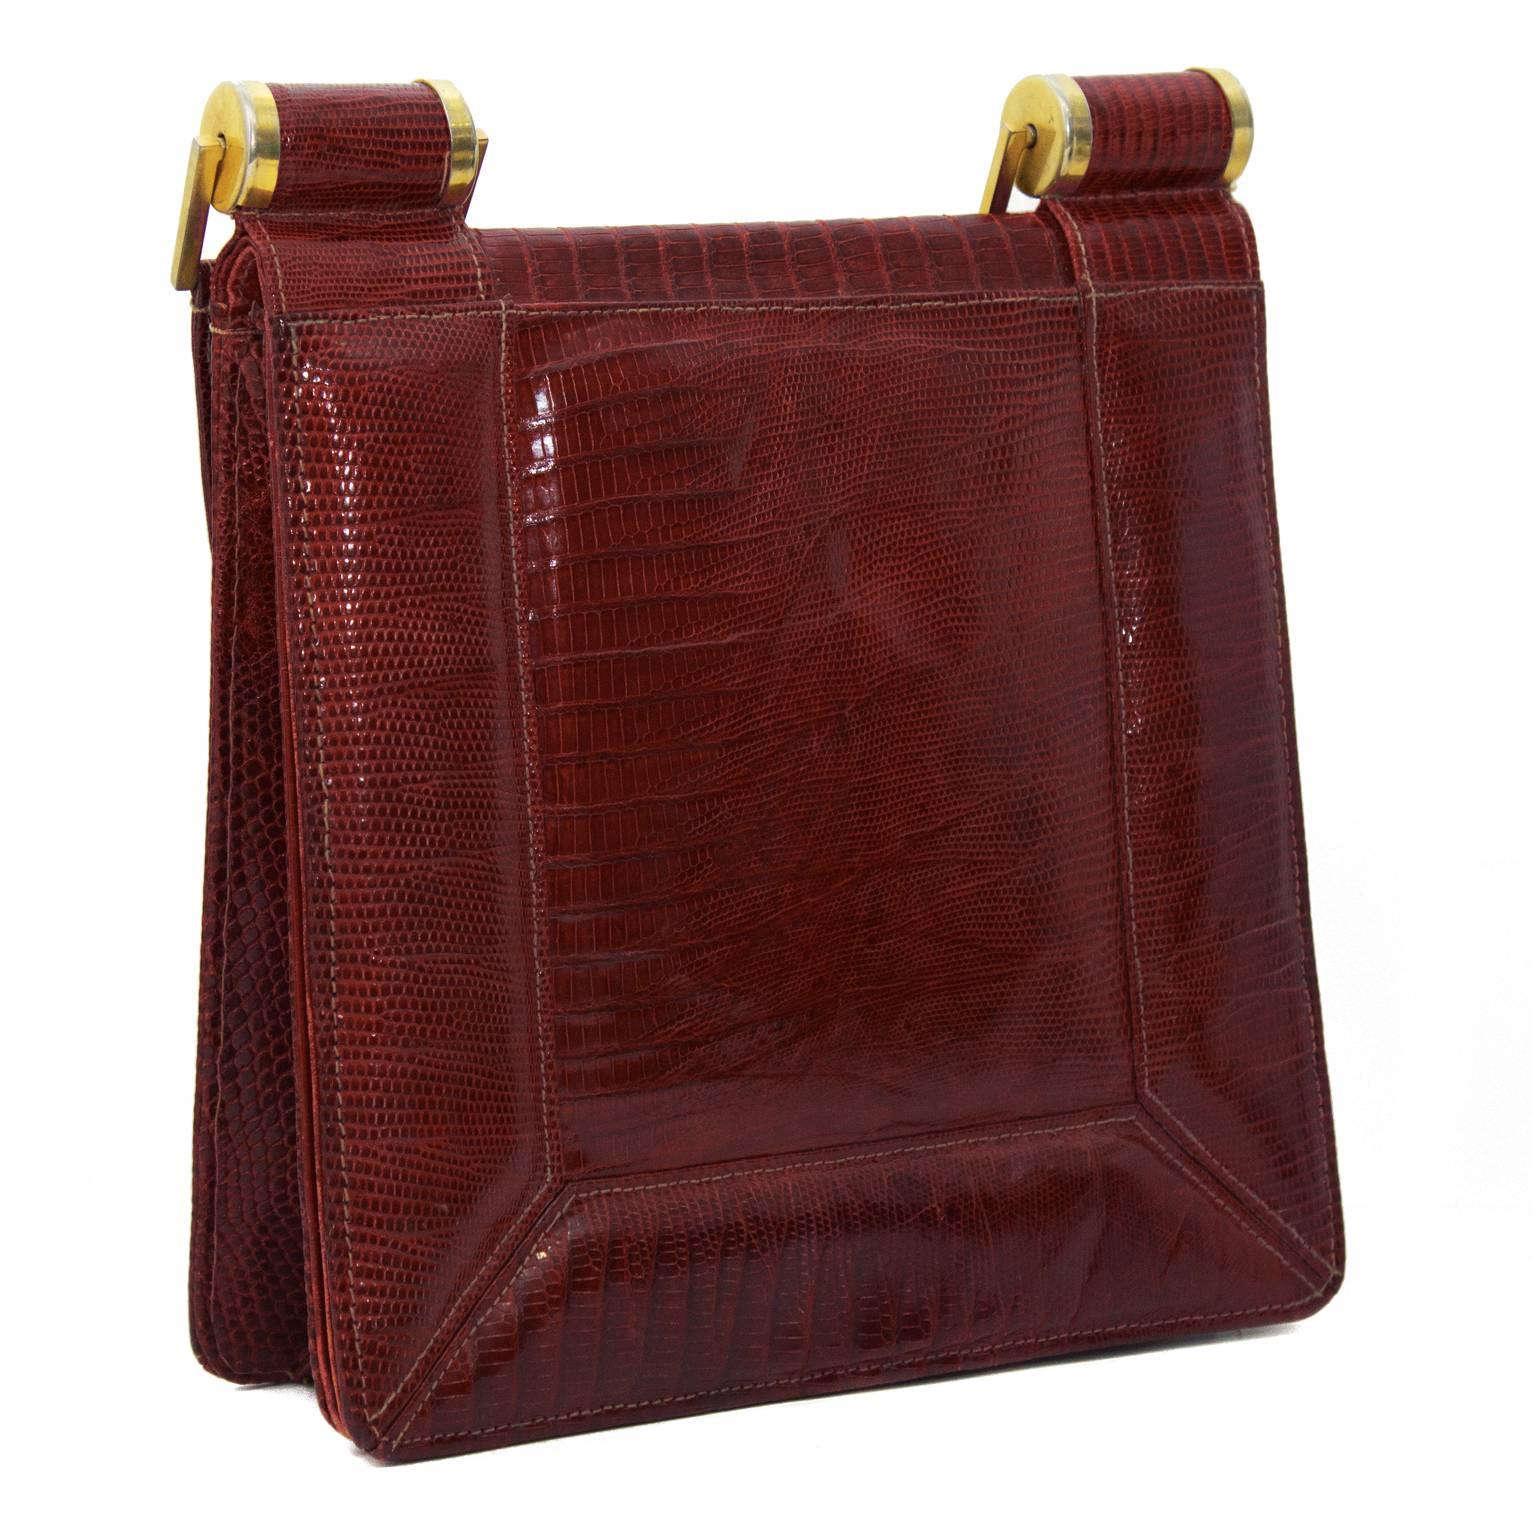 Modernist style burgundy lizard skin handbag from the 1940's. Square shape with a front flap closure. Handle is attached with large gold hardware links. Interior is lined in red leather with one zip pocket and two other compartments. Expandable